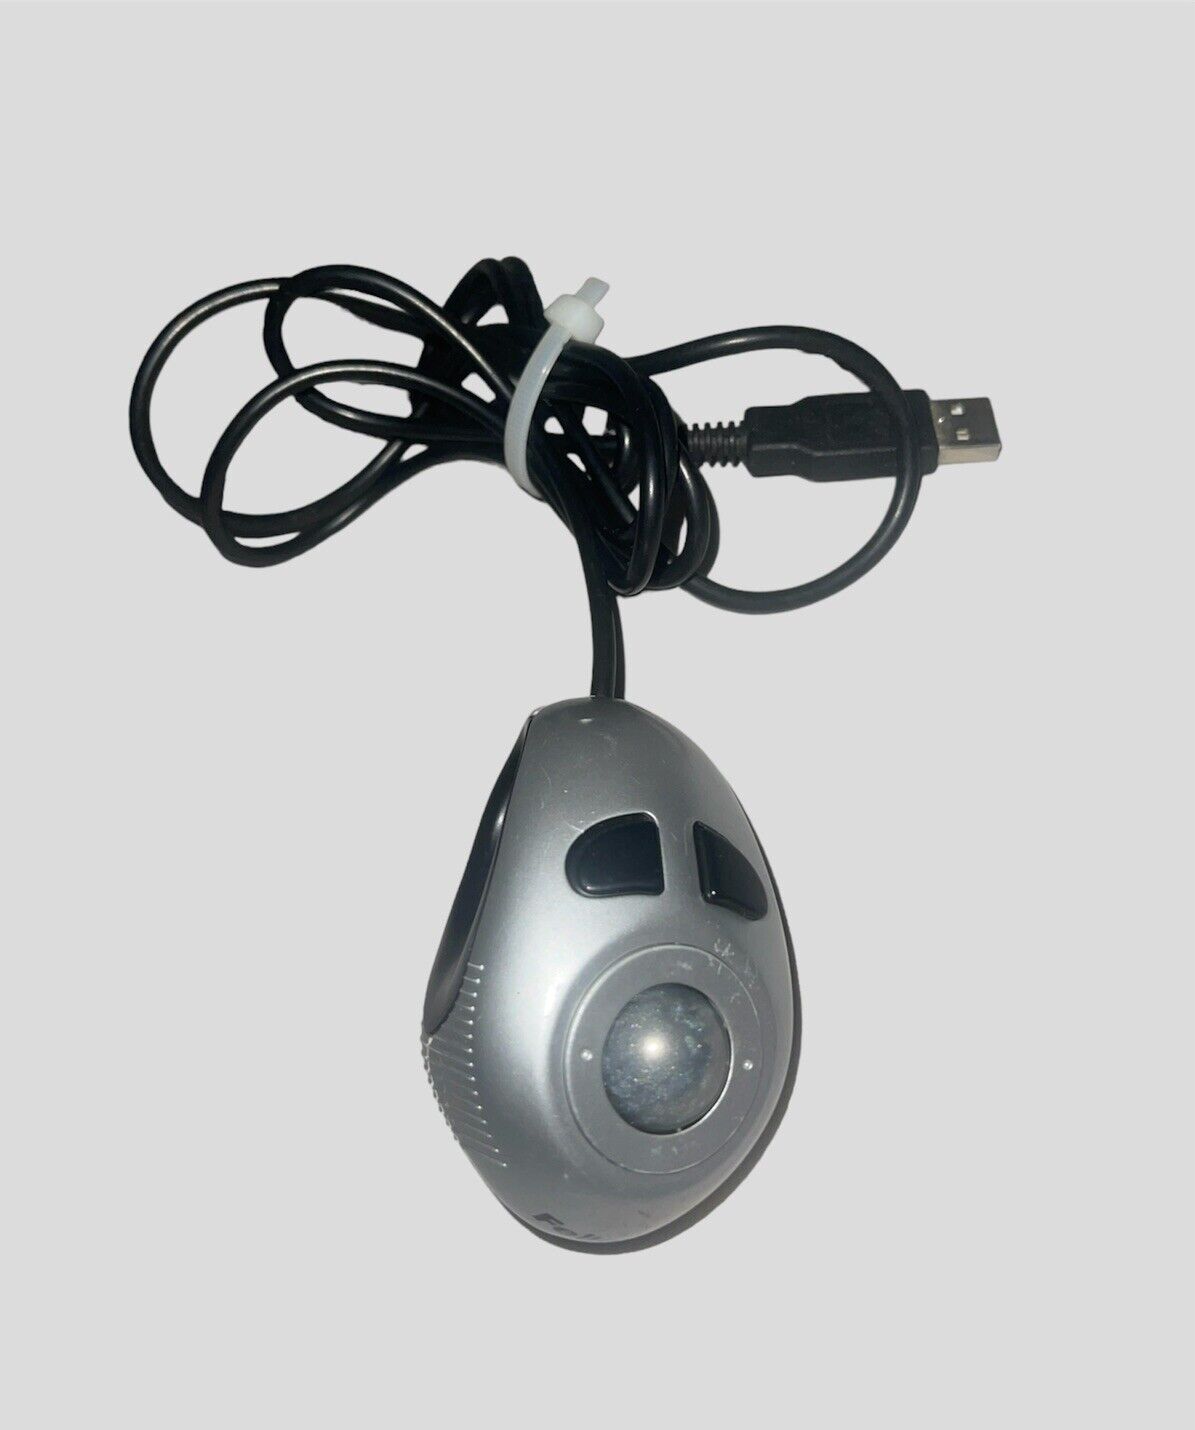 Fellowes Wired USB Micro Trac Trackball 99928, FDM-G62 P Computer Mouse